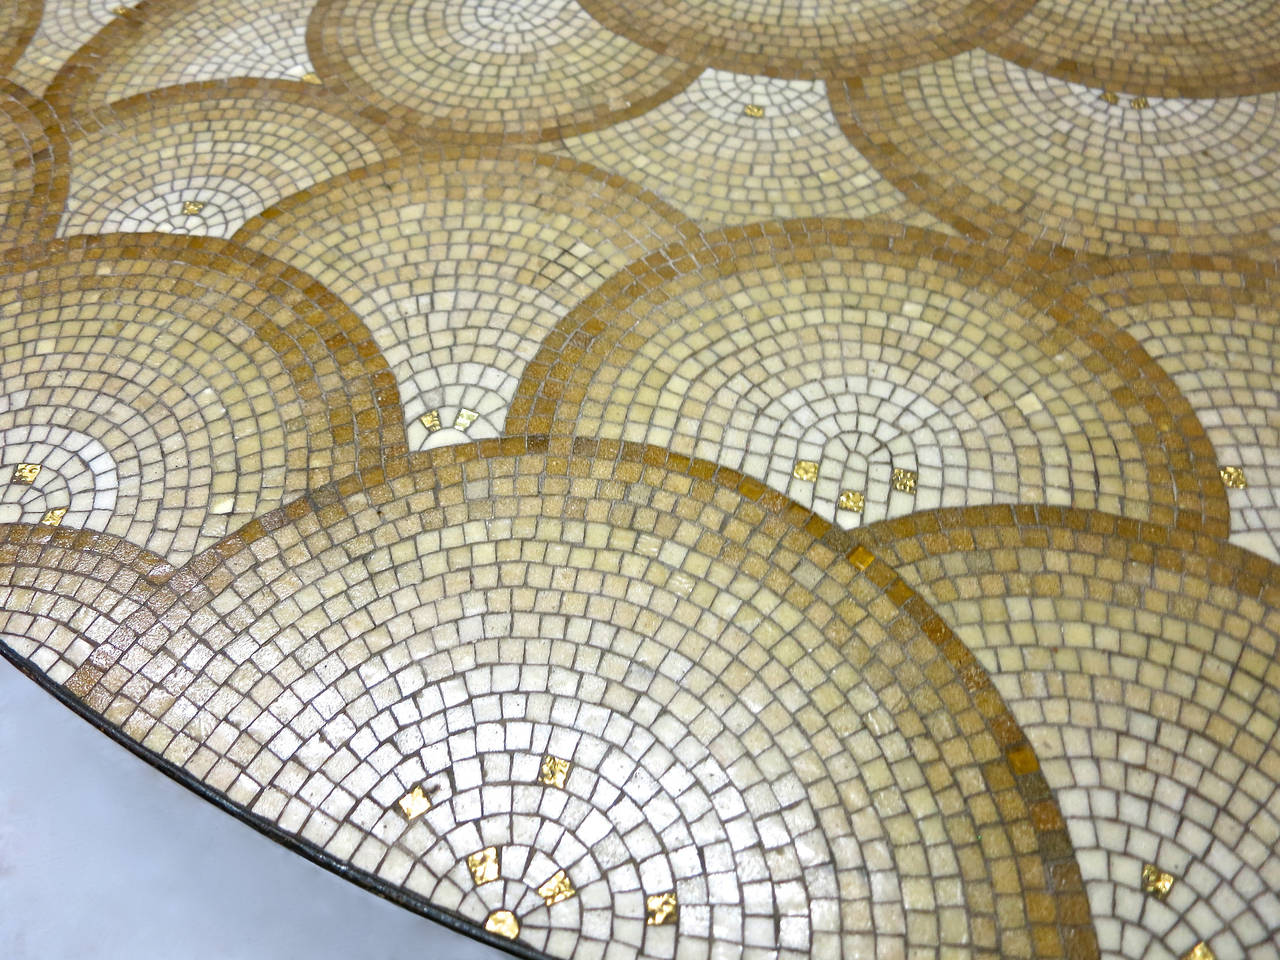 Mid-20th Century Kidney Shaped Coffee Table with Mosaic Top in Gold Tone Tesserae, circa 1940